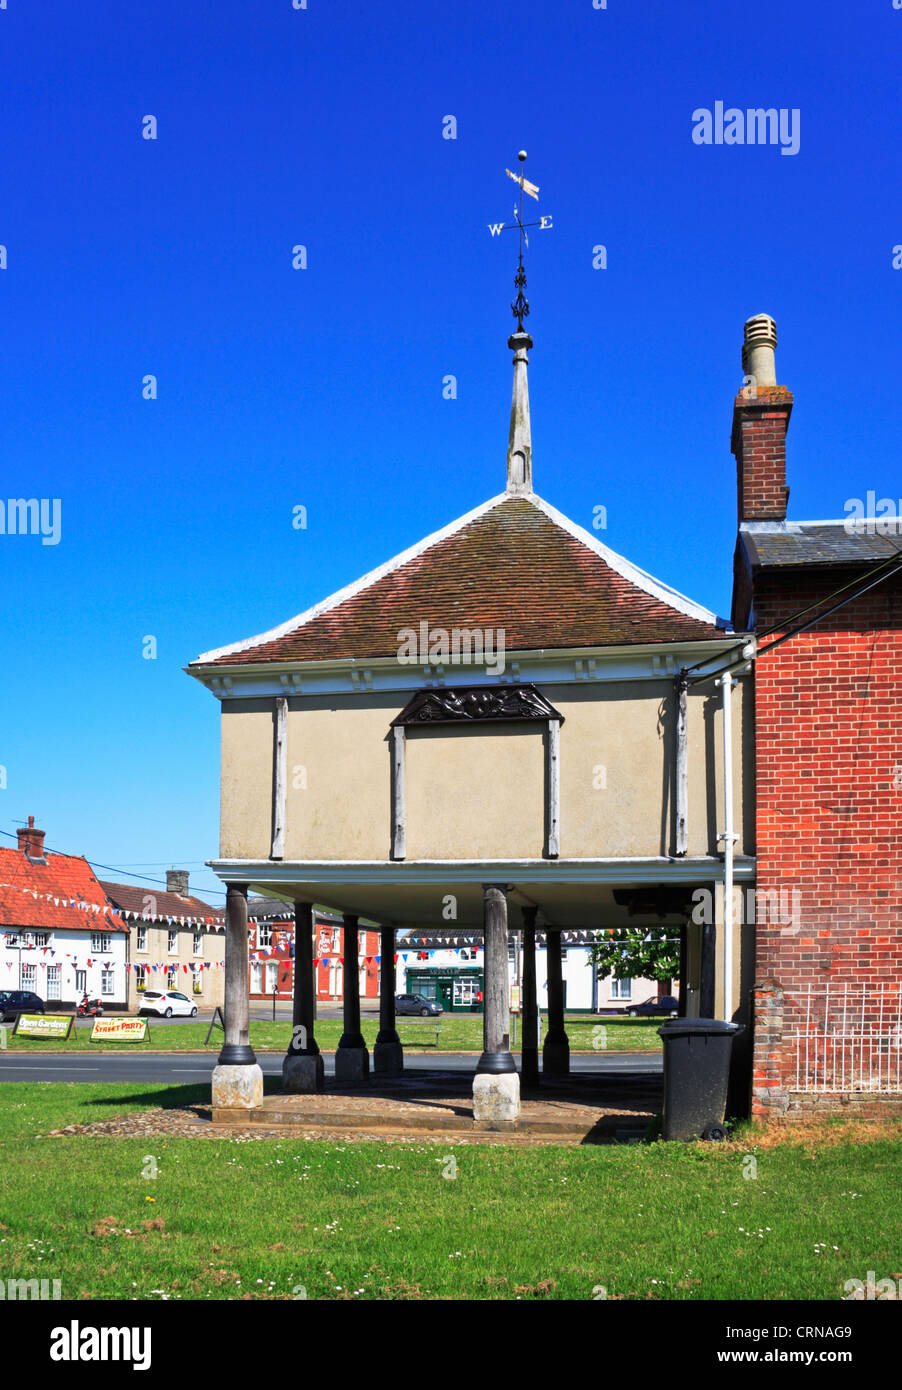 A view of the old market cross by the green at New Buckenham, Norfolk, England, United Kingdom. Stock Photo